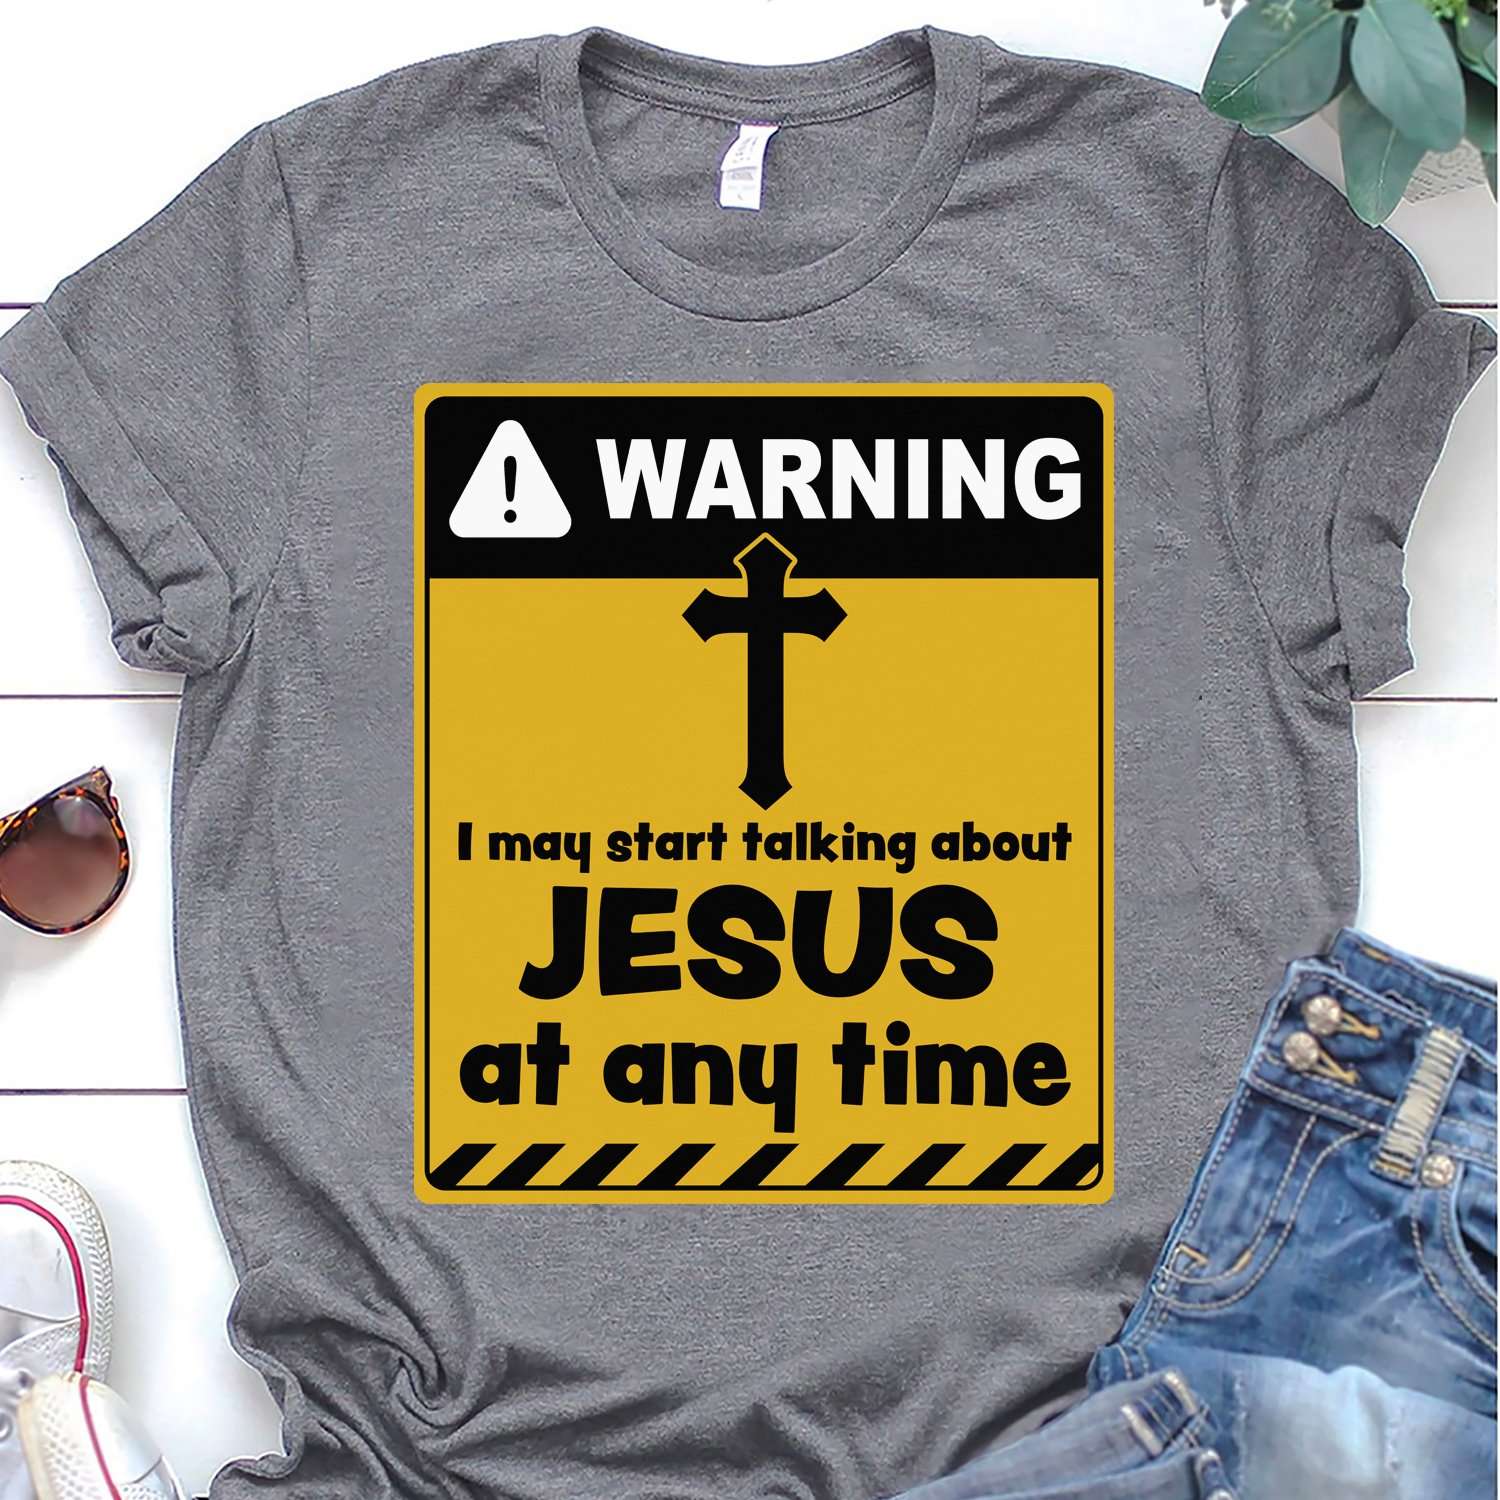 Warning I may start talking about Jesus at any time - Jesus faith, God's cross